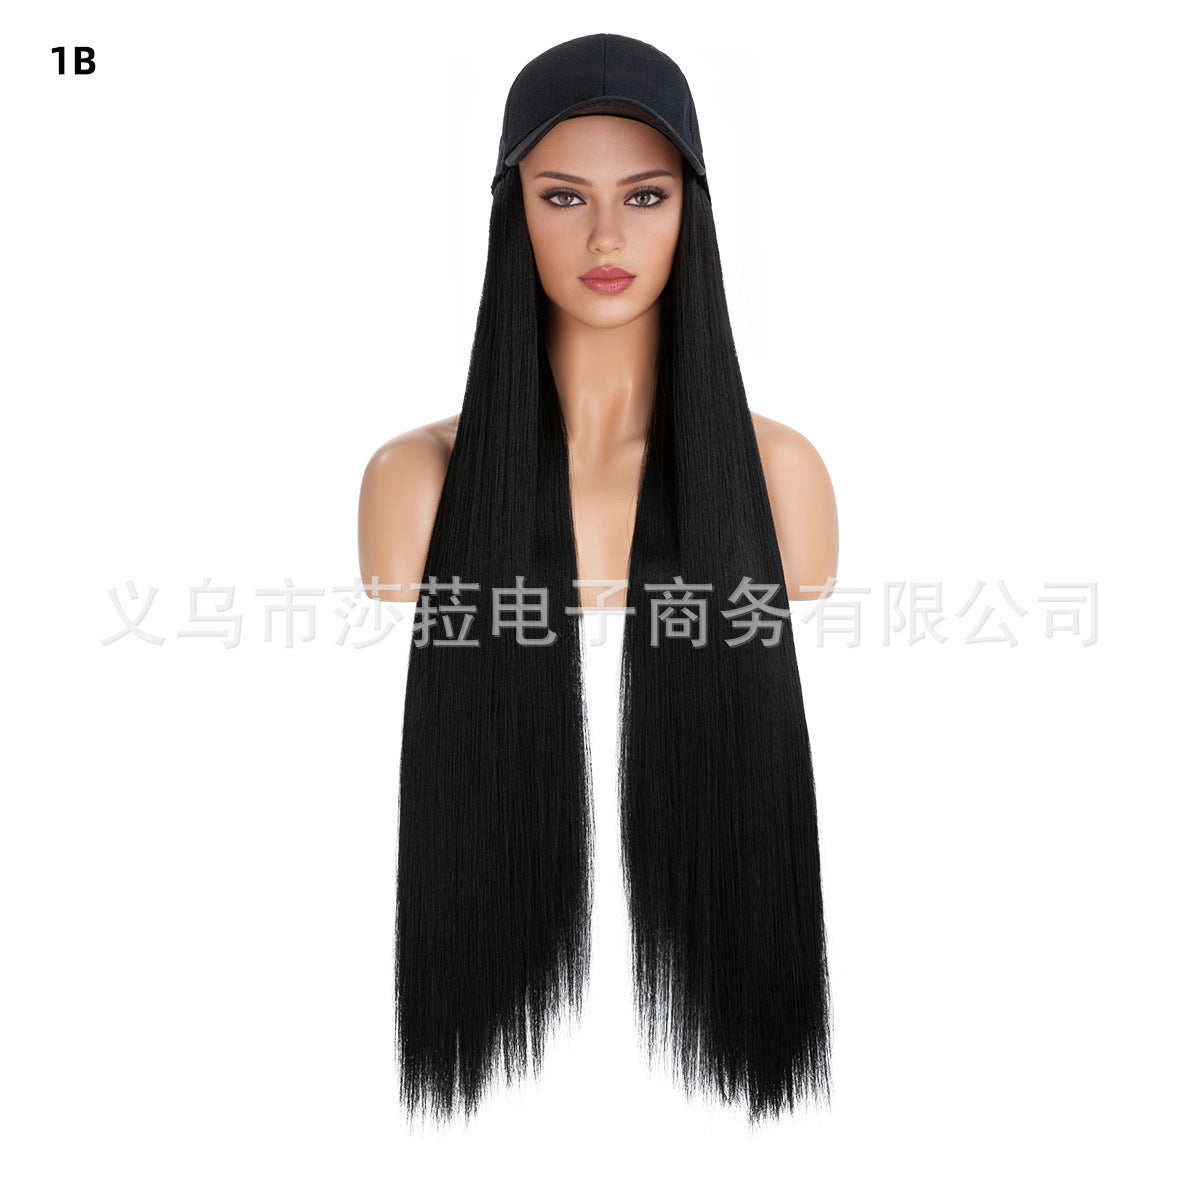 Black and Purple Ombre Long Straight Hair Wig with Knit Beanie Cap, Synthetic Full Head Hairpiece for Women